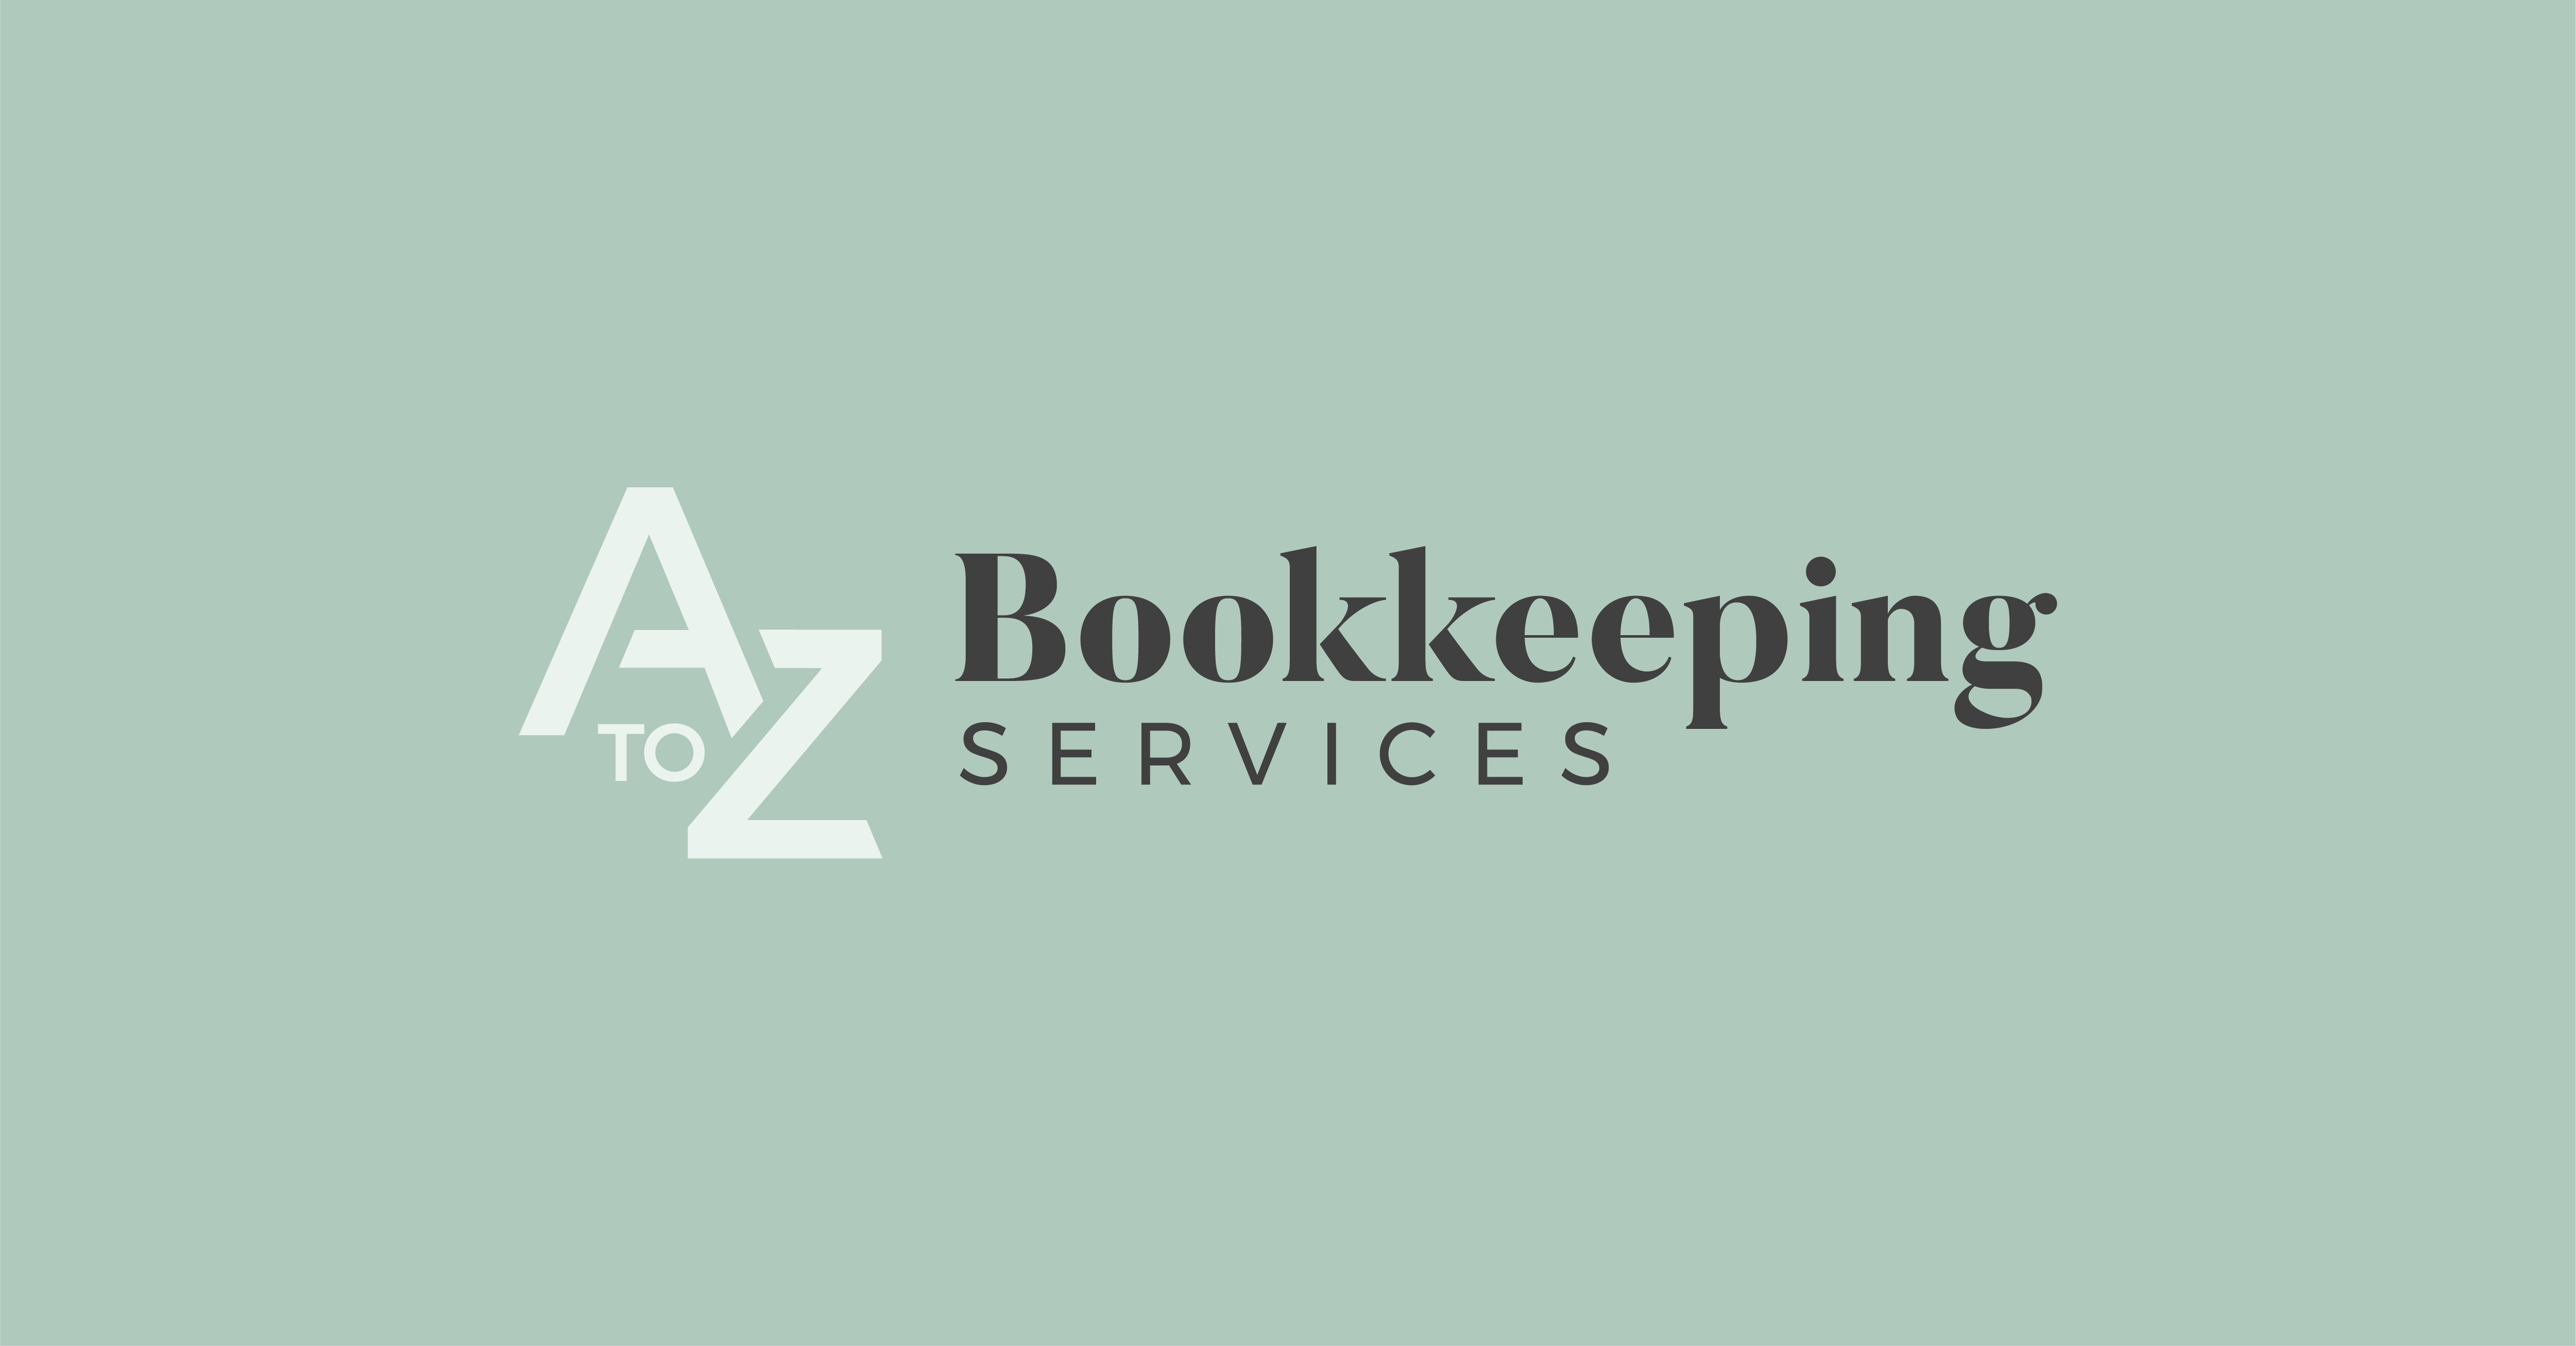 A to Z Bookkeeping thumbnail